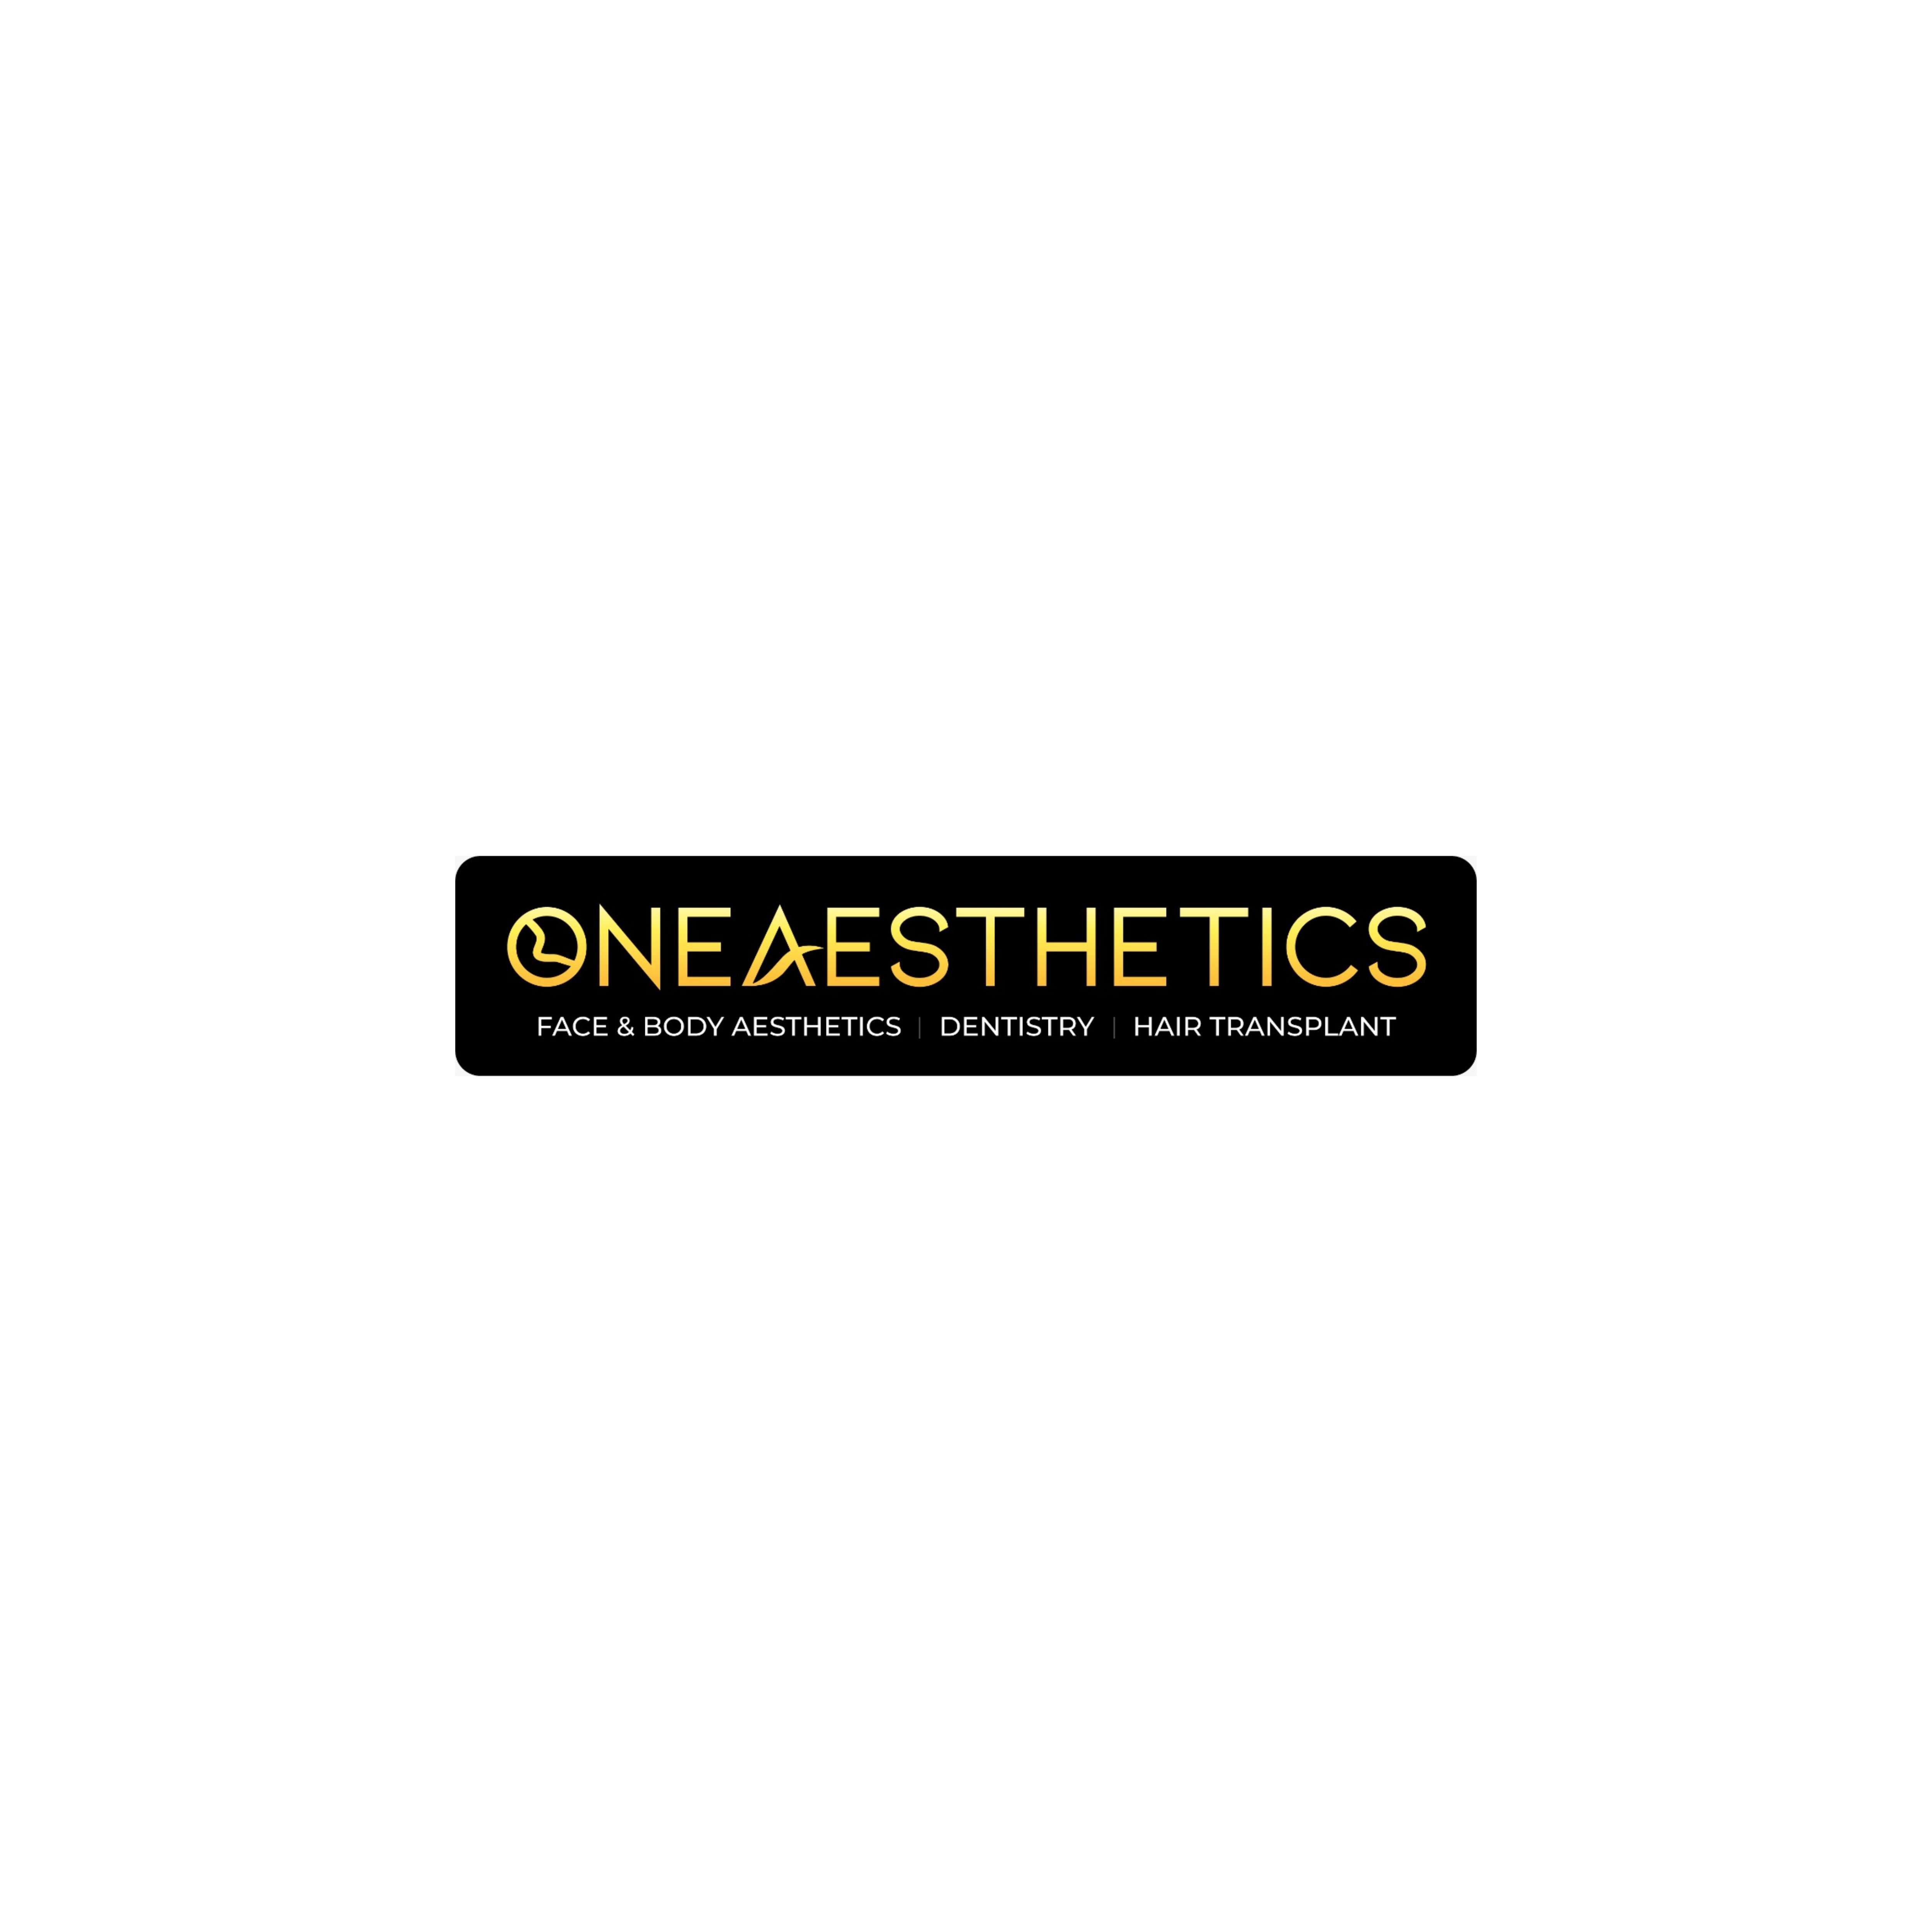 oneaesthetic9 Profile Picture